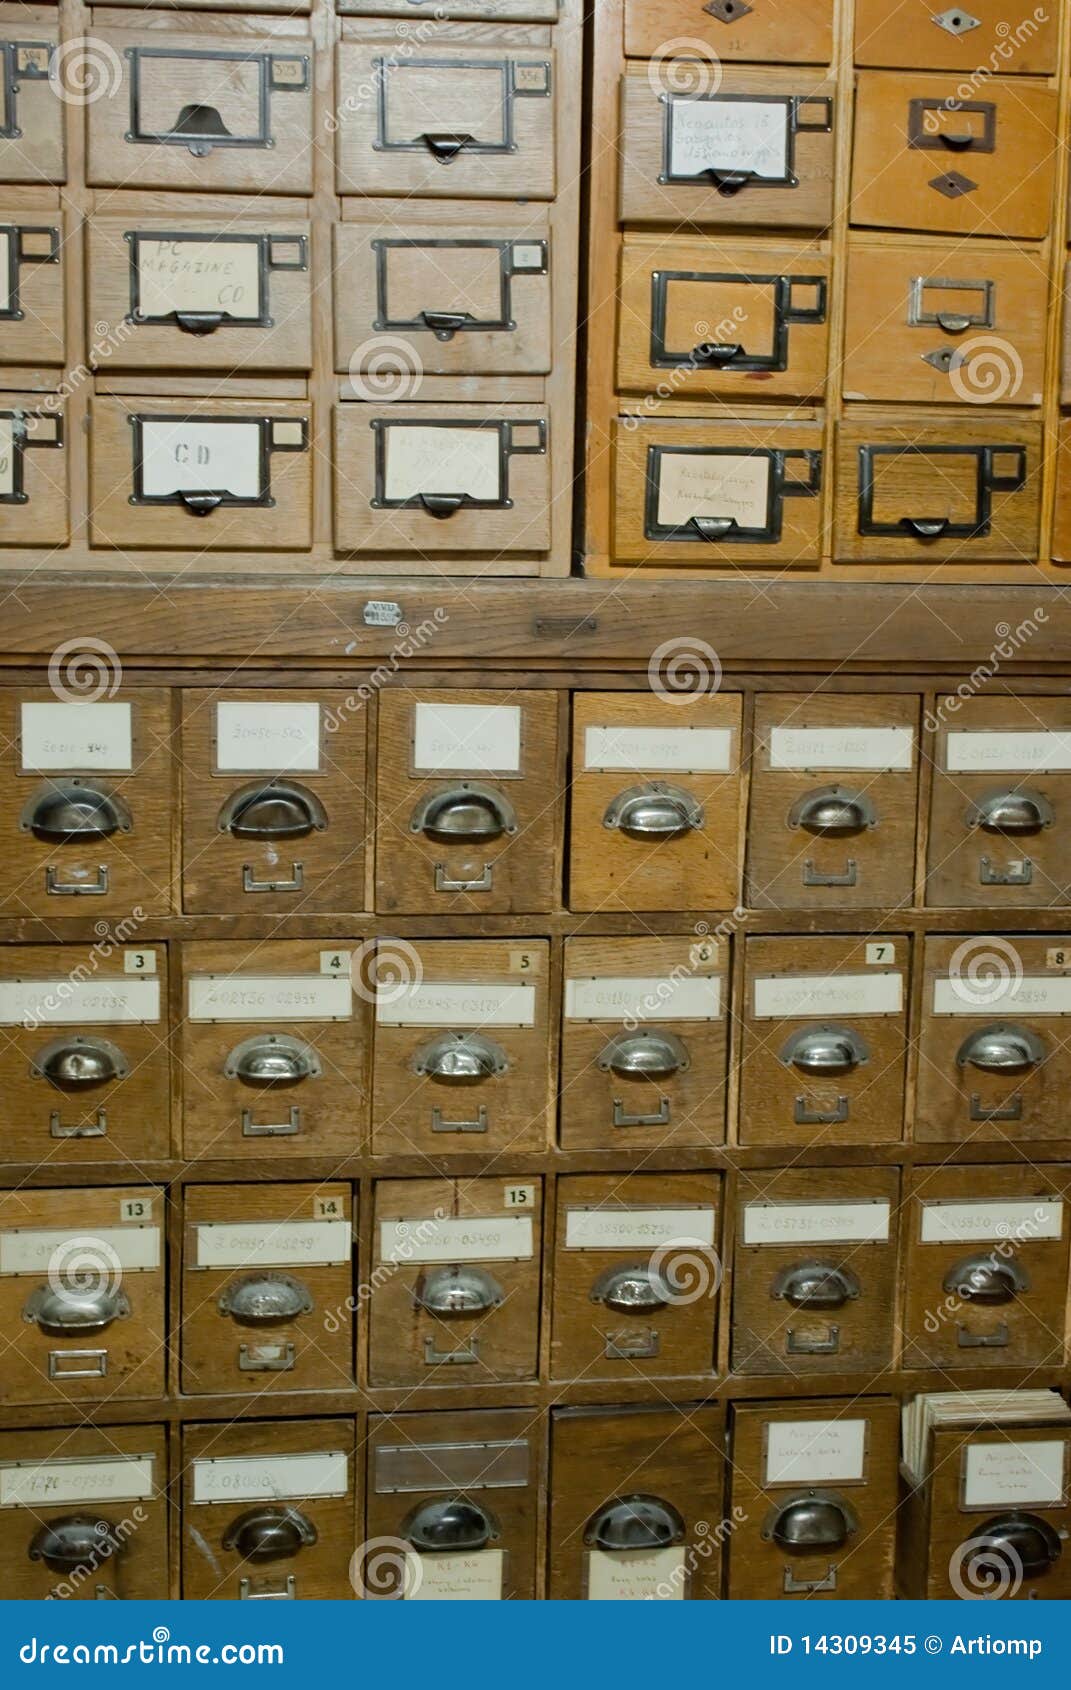 library vintage database, archives